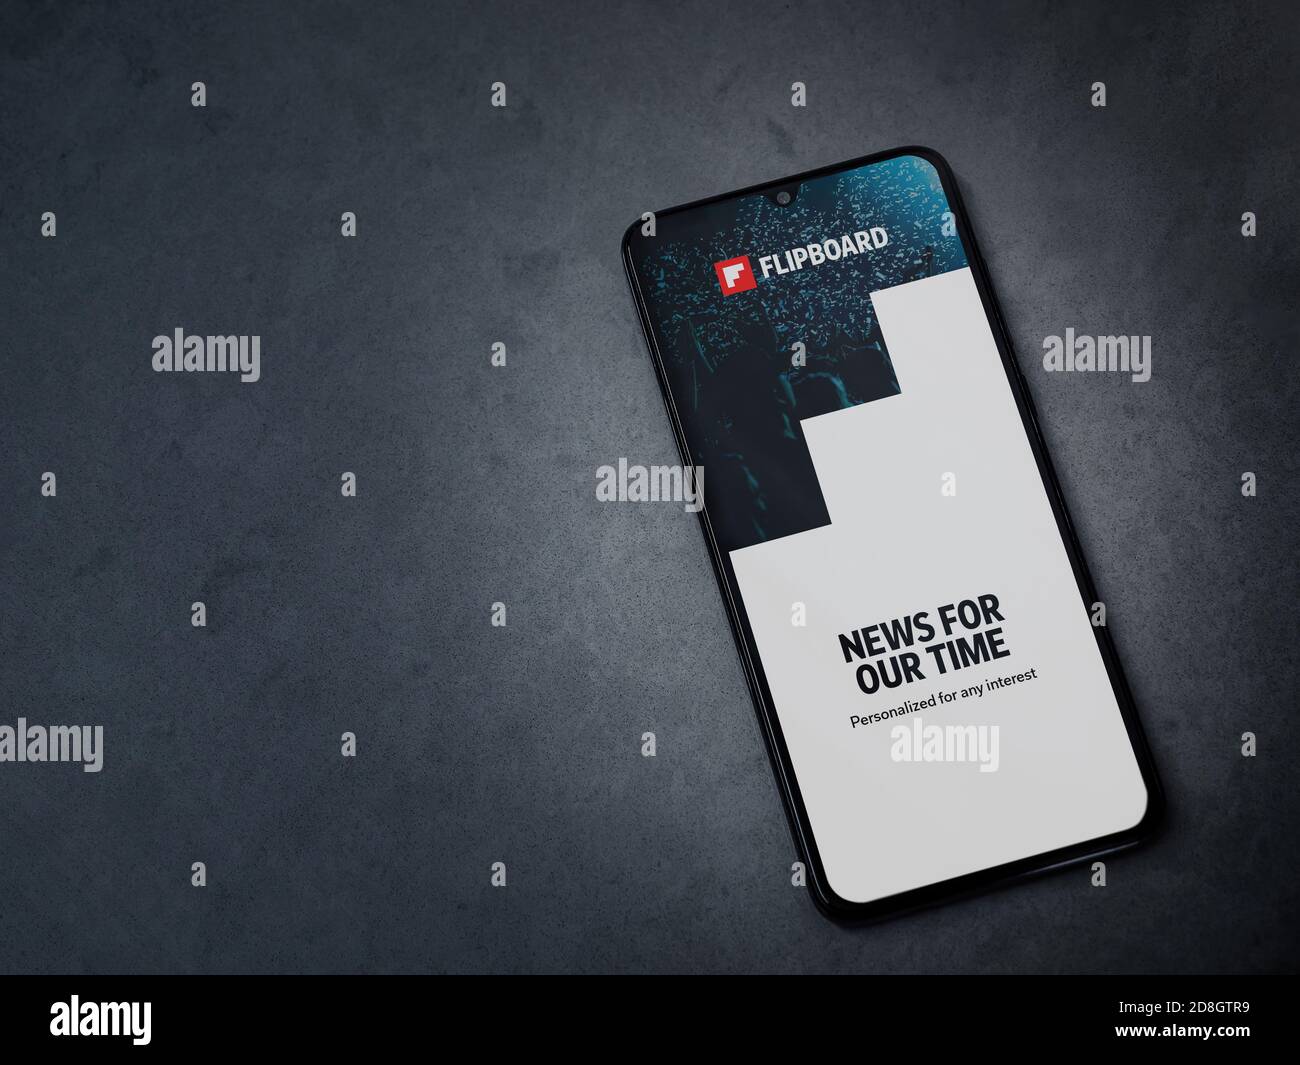 Lod, Israel - July 8, 2020: Flipboard app launch screen with logo on the display of a black mobile smartphone on dark marble stone background. Top vie Stock Photo